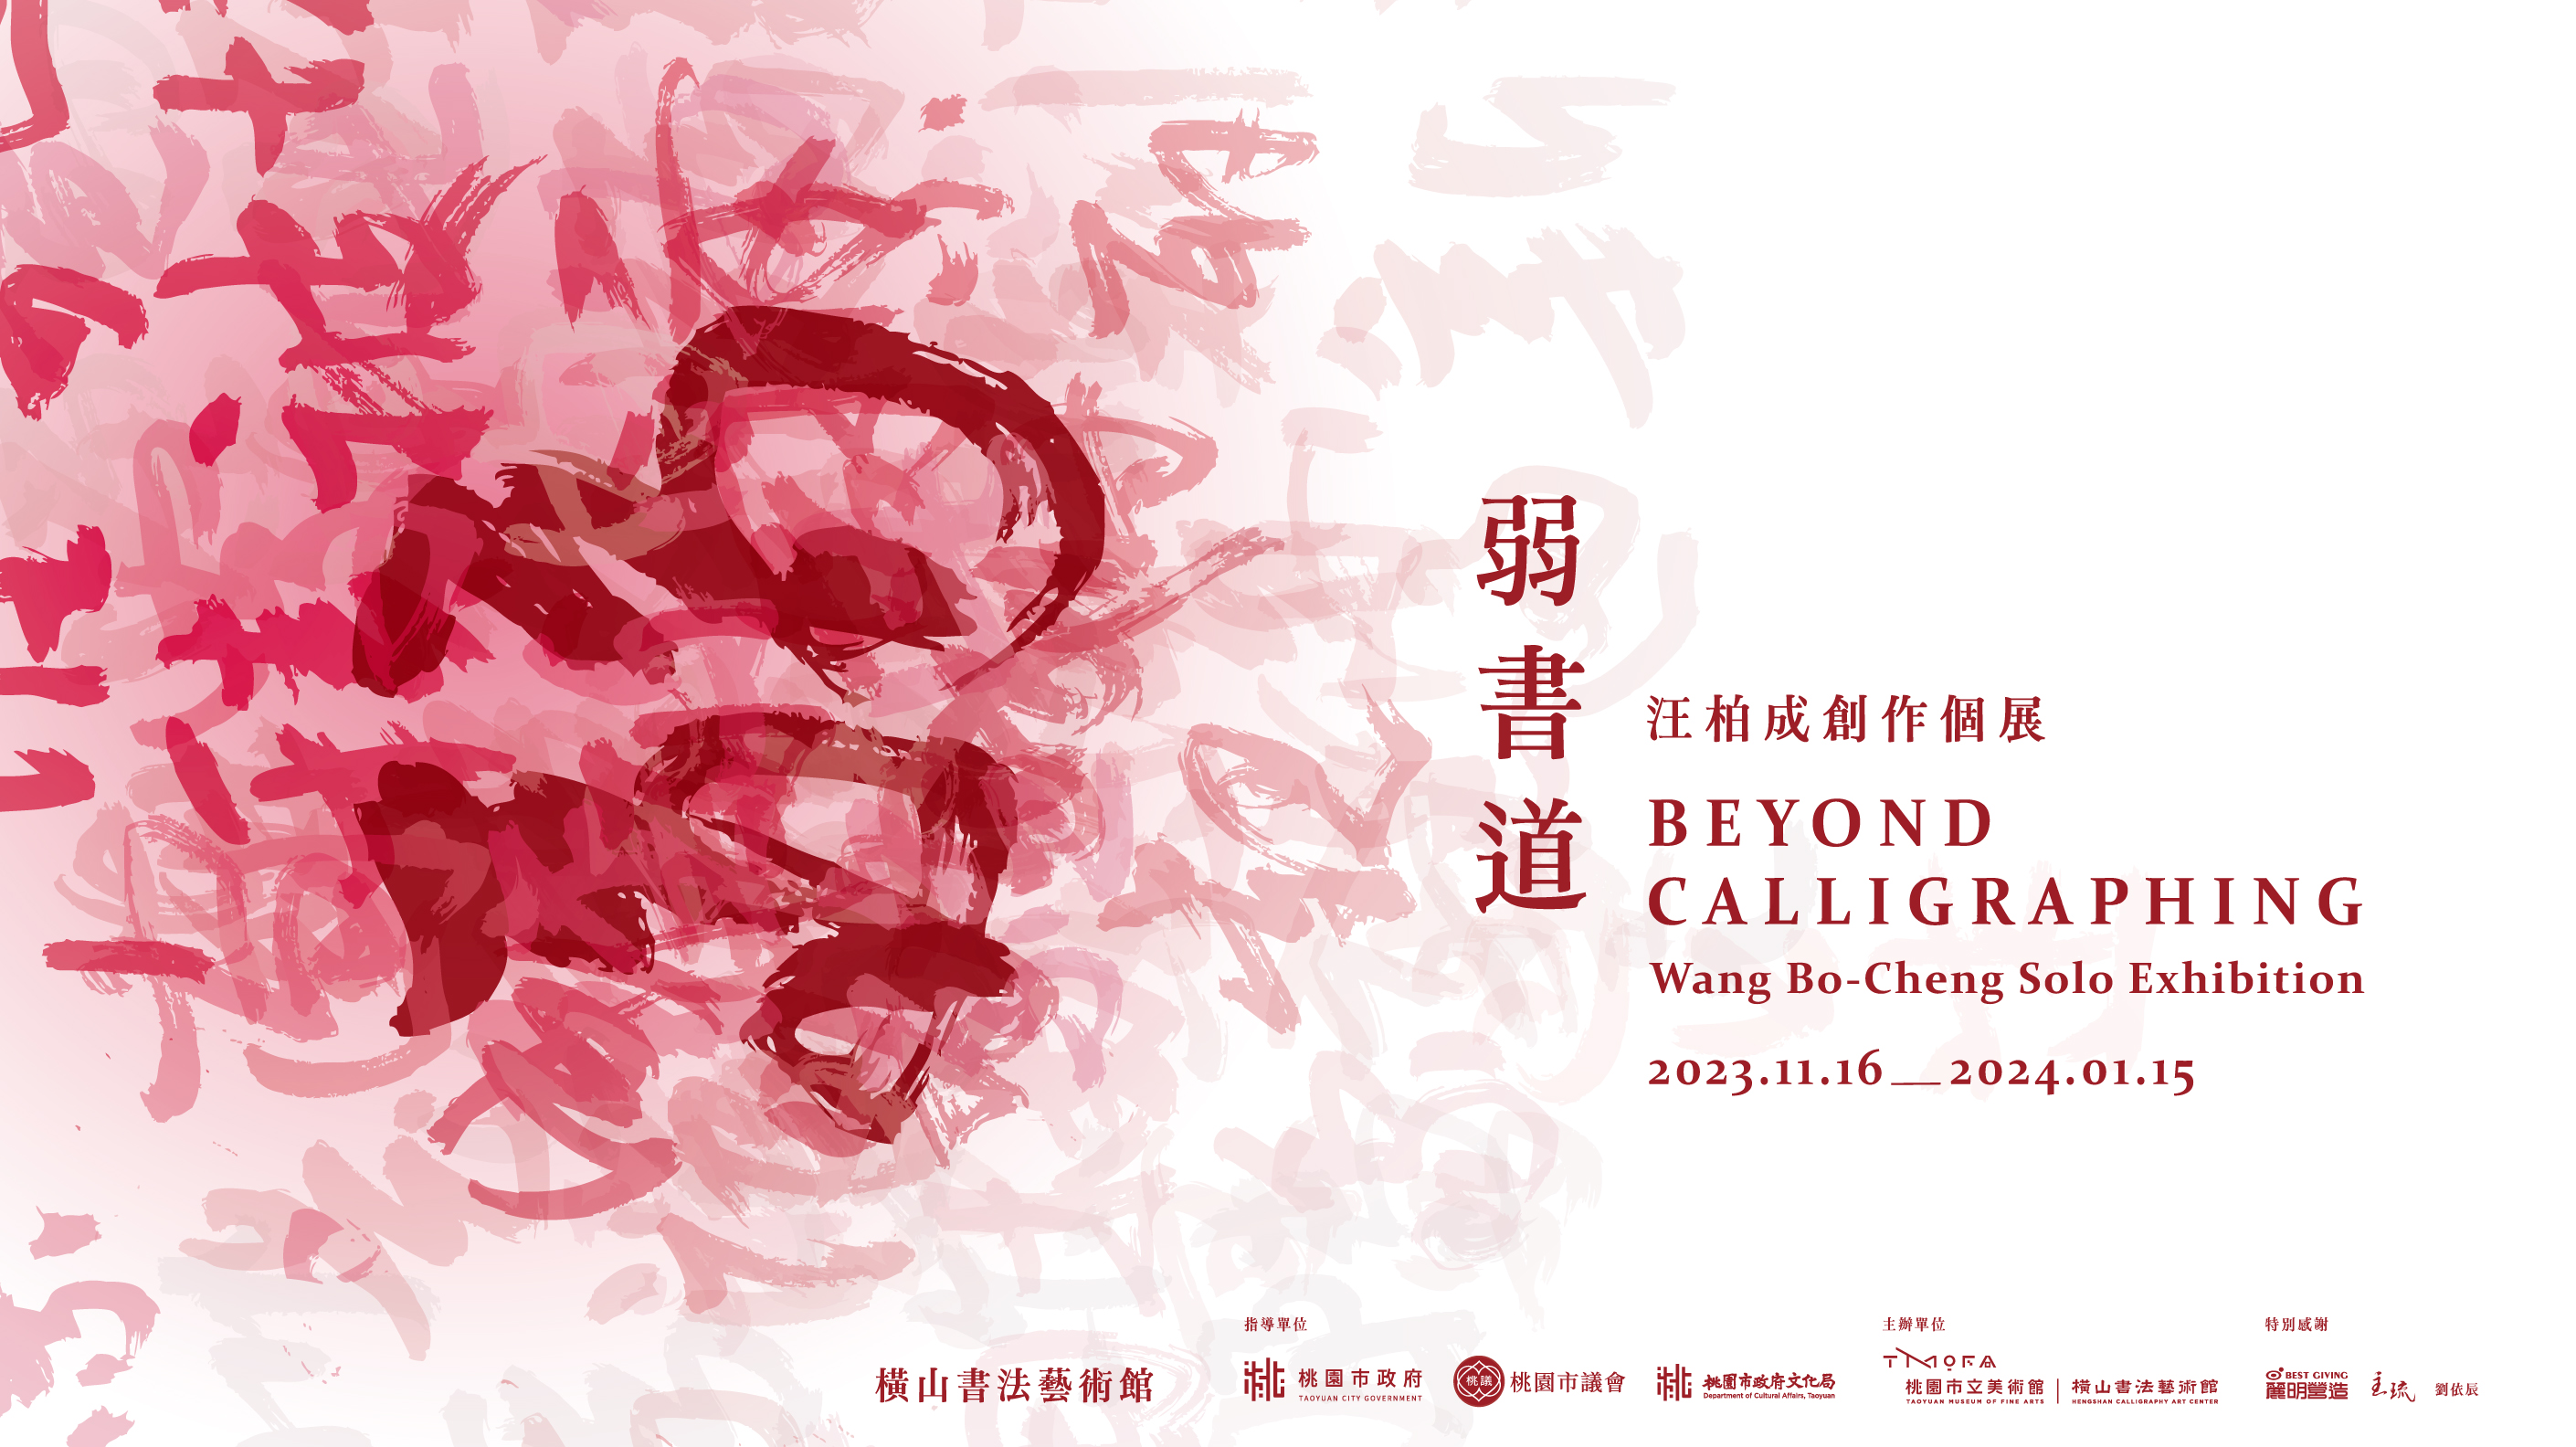 Beyond Calligraphing–Wang Bo-Cheng Solo Exhibition